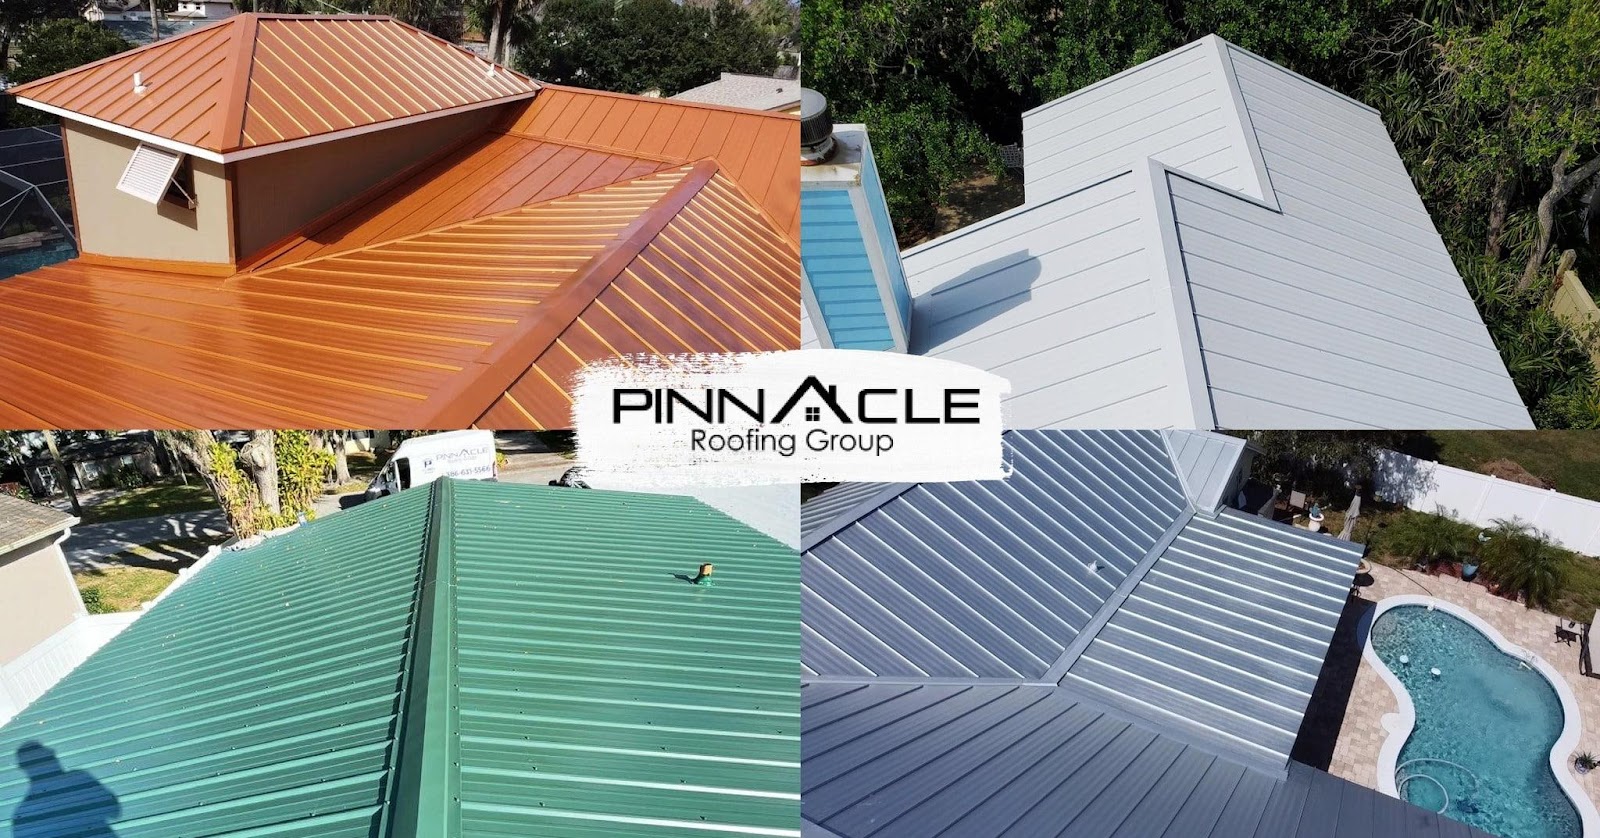 Pinnacle Roofing Group specializes in residential and commercial roof coating in Orlando, FL. It also offers roof repair and installation of seamless gutters and skylights, covering the entire Central Florida.